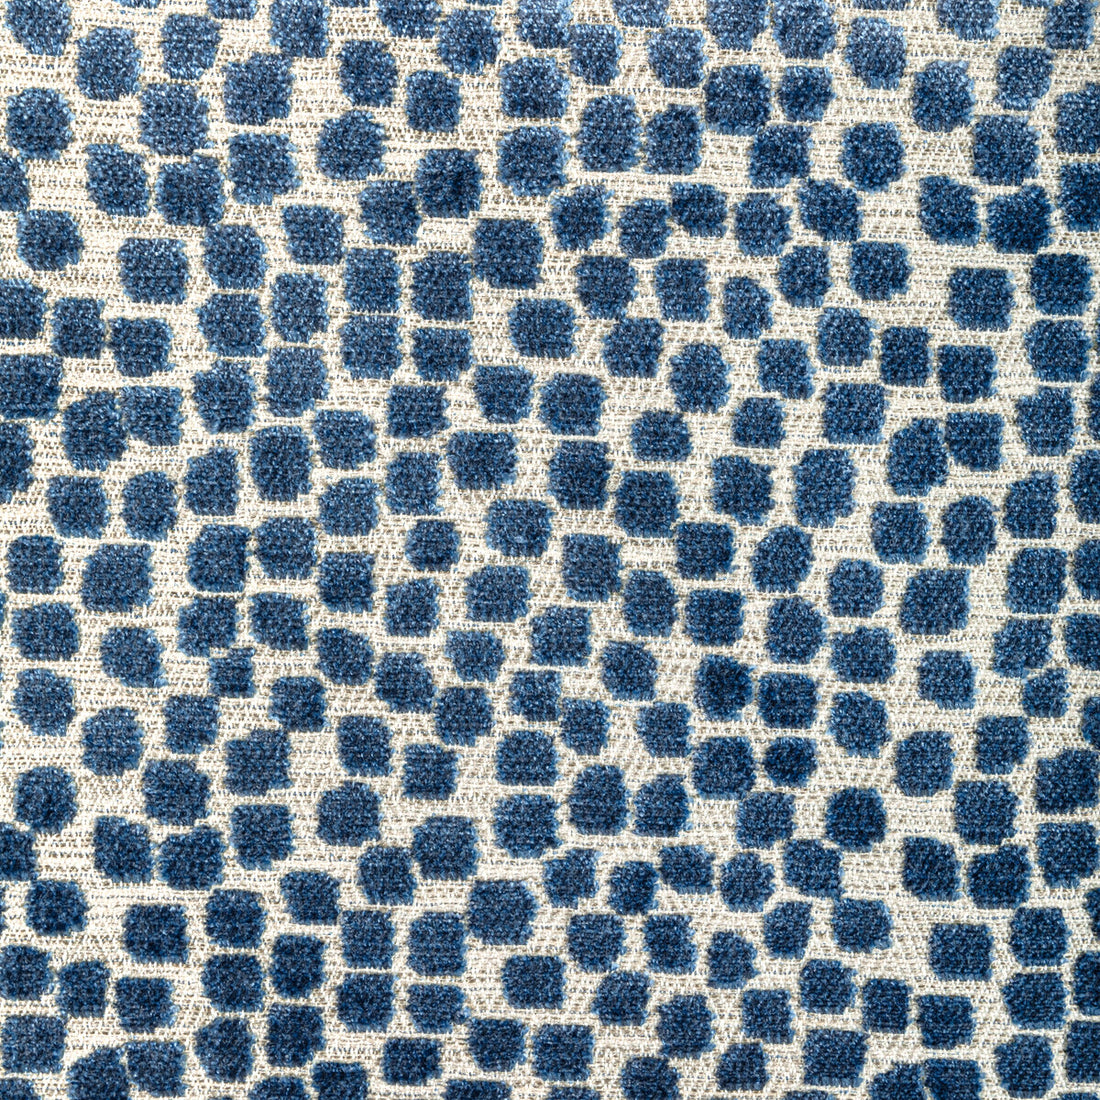 Flurries fabric in navy color - pattern 34849.50.0 - by Kravet Design in the Thom Filicia collection